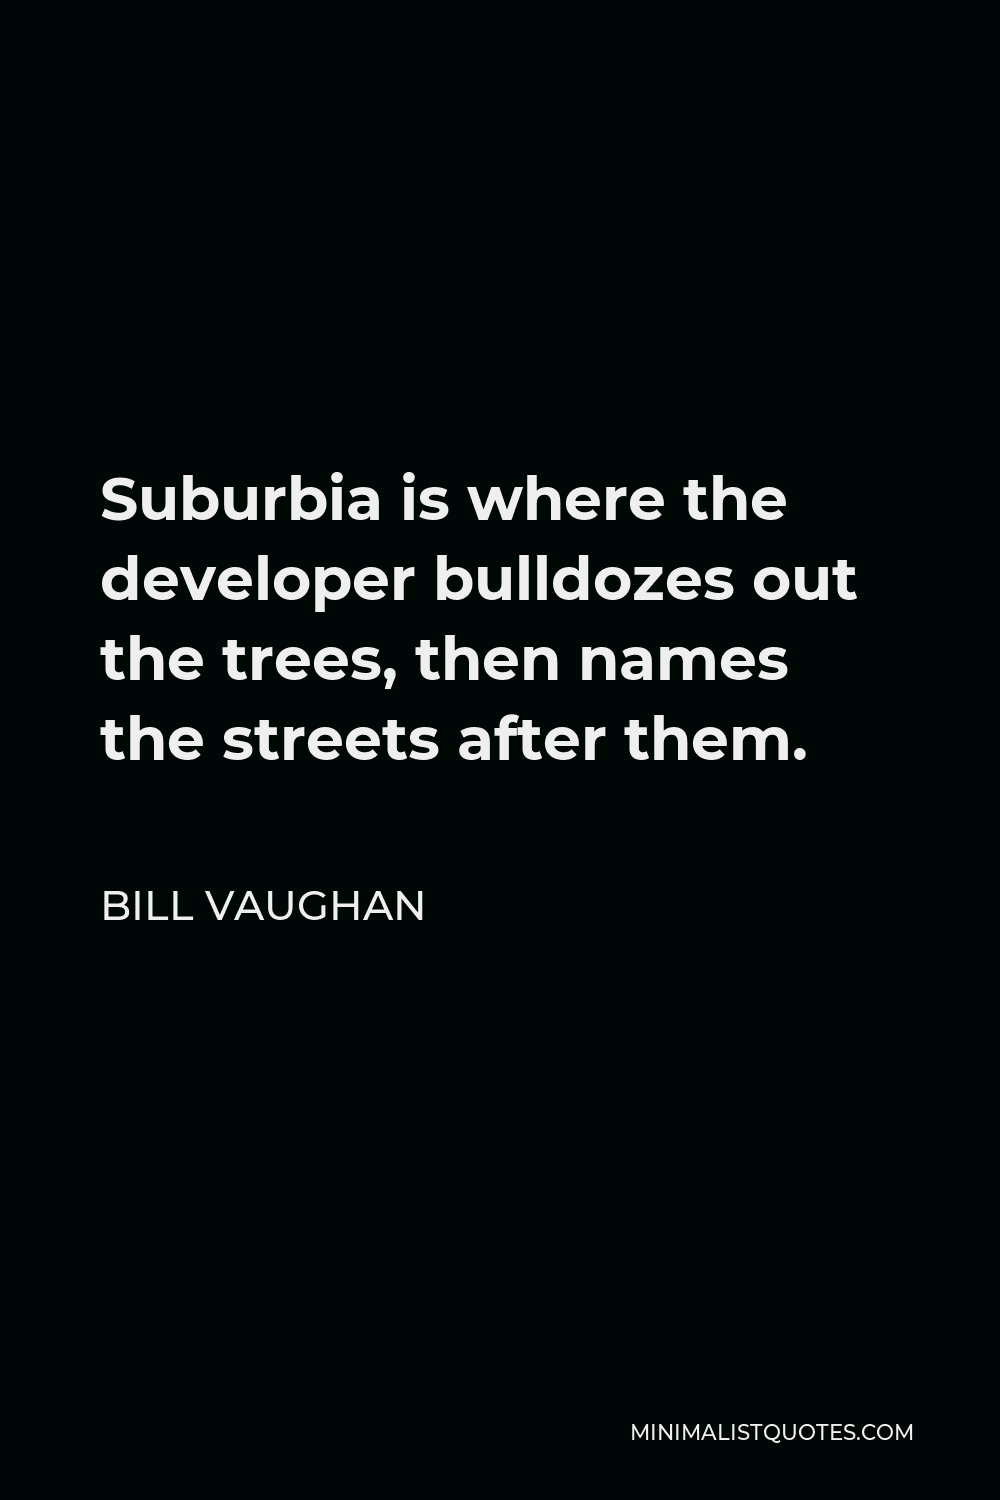 Bill Vaughan Quote - Suburbia is where the developer bulldozes out the trees, then names the streets after them.